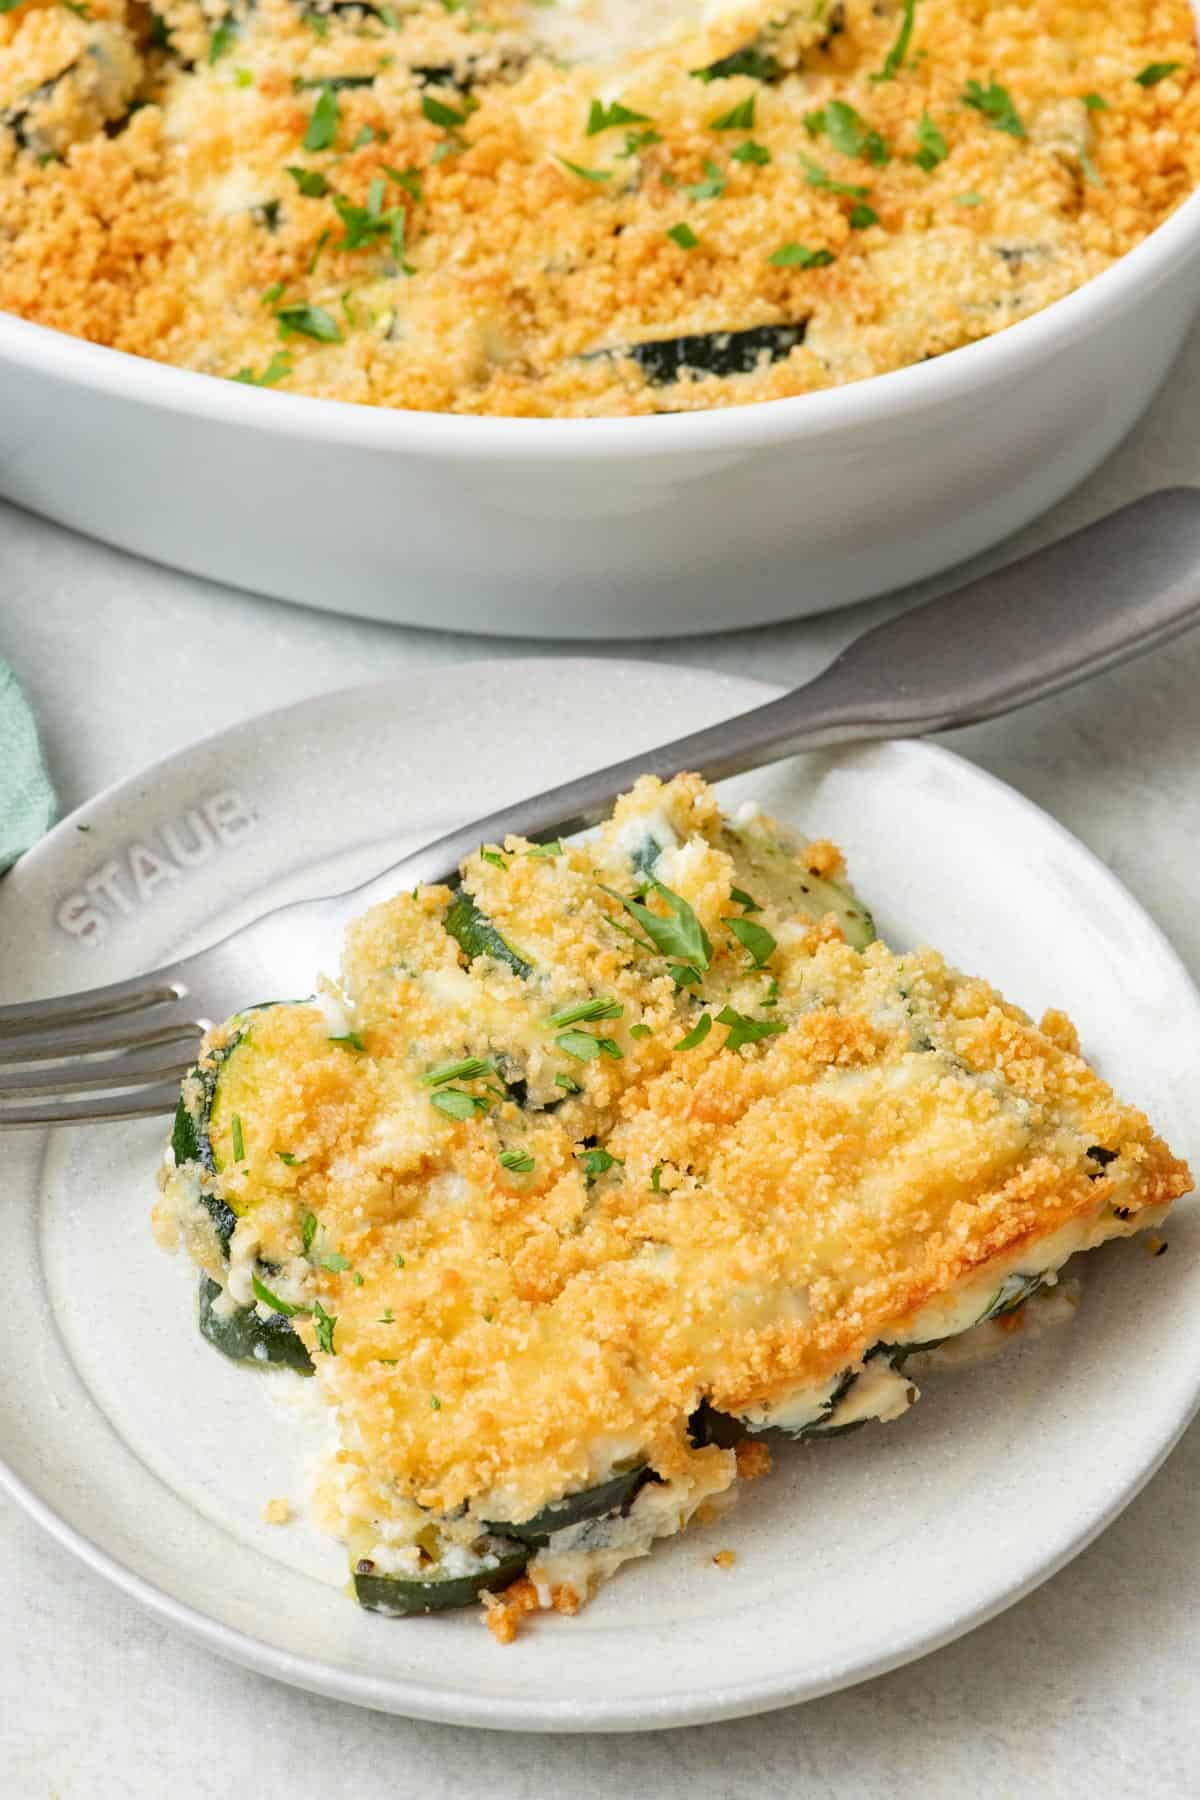 Zucchini casserole with a golden brown top on a small plate with a fork and the casserole dish nearby.